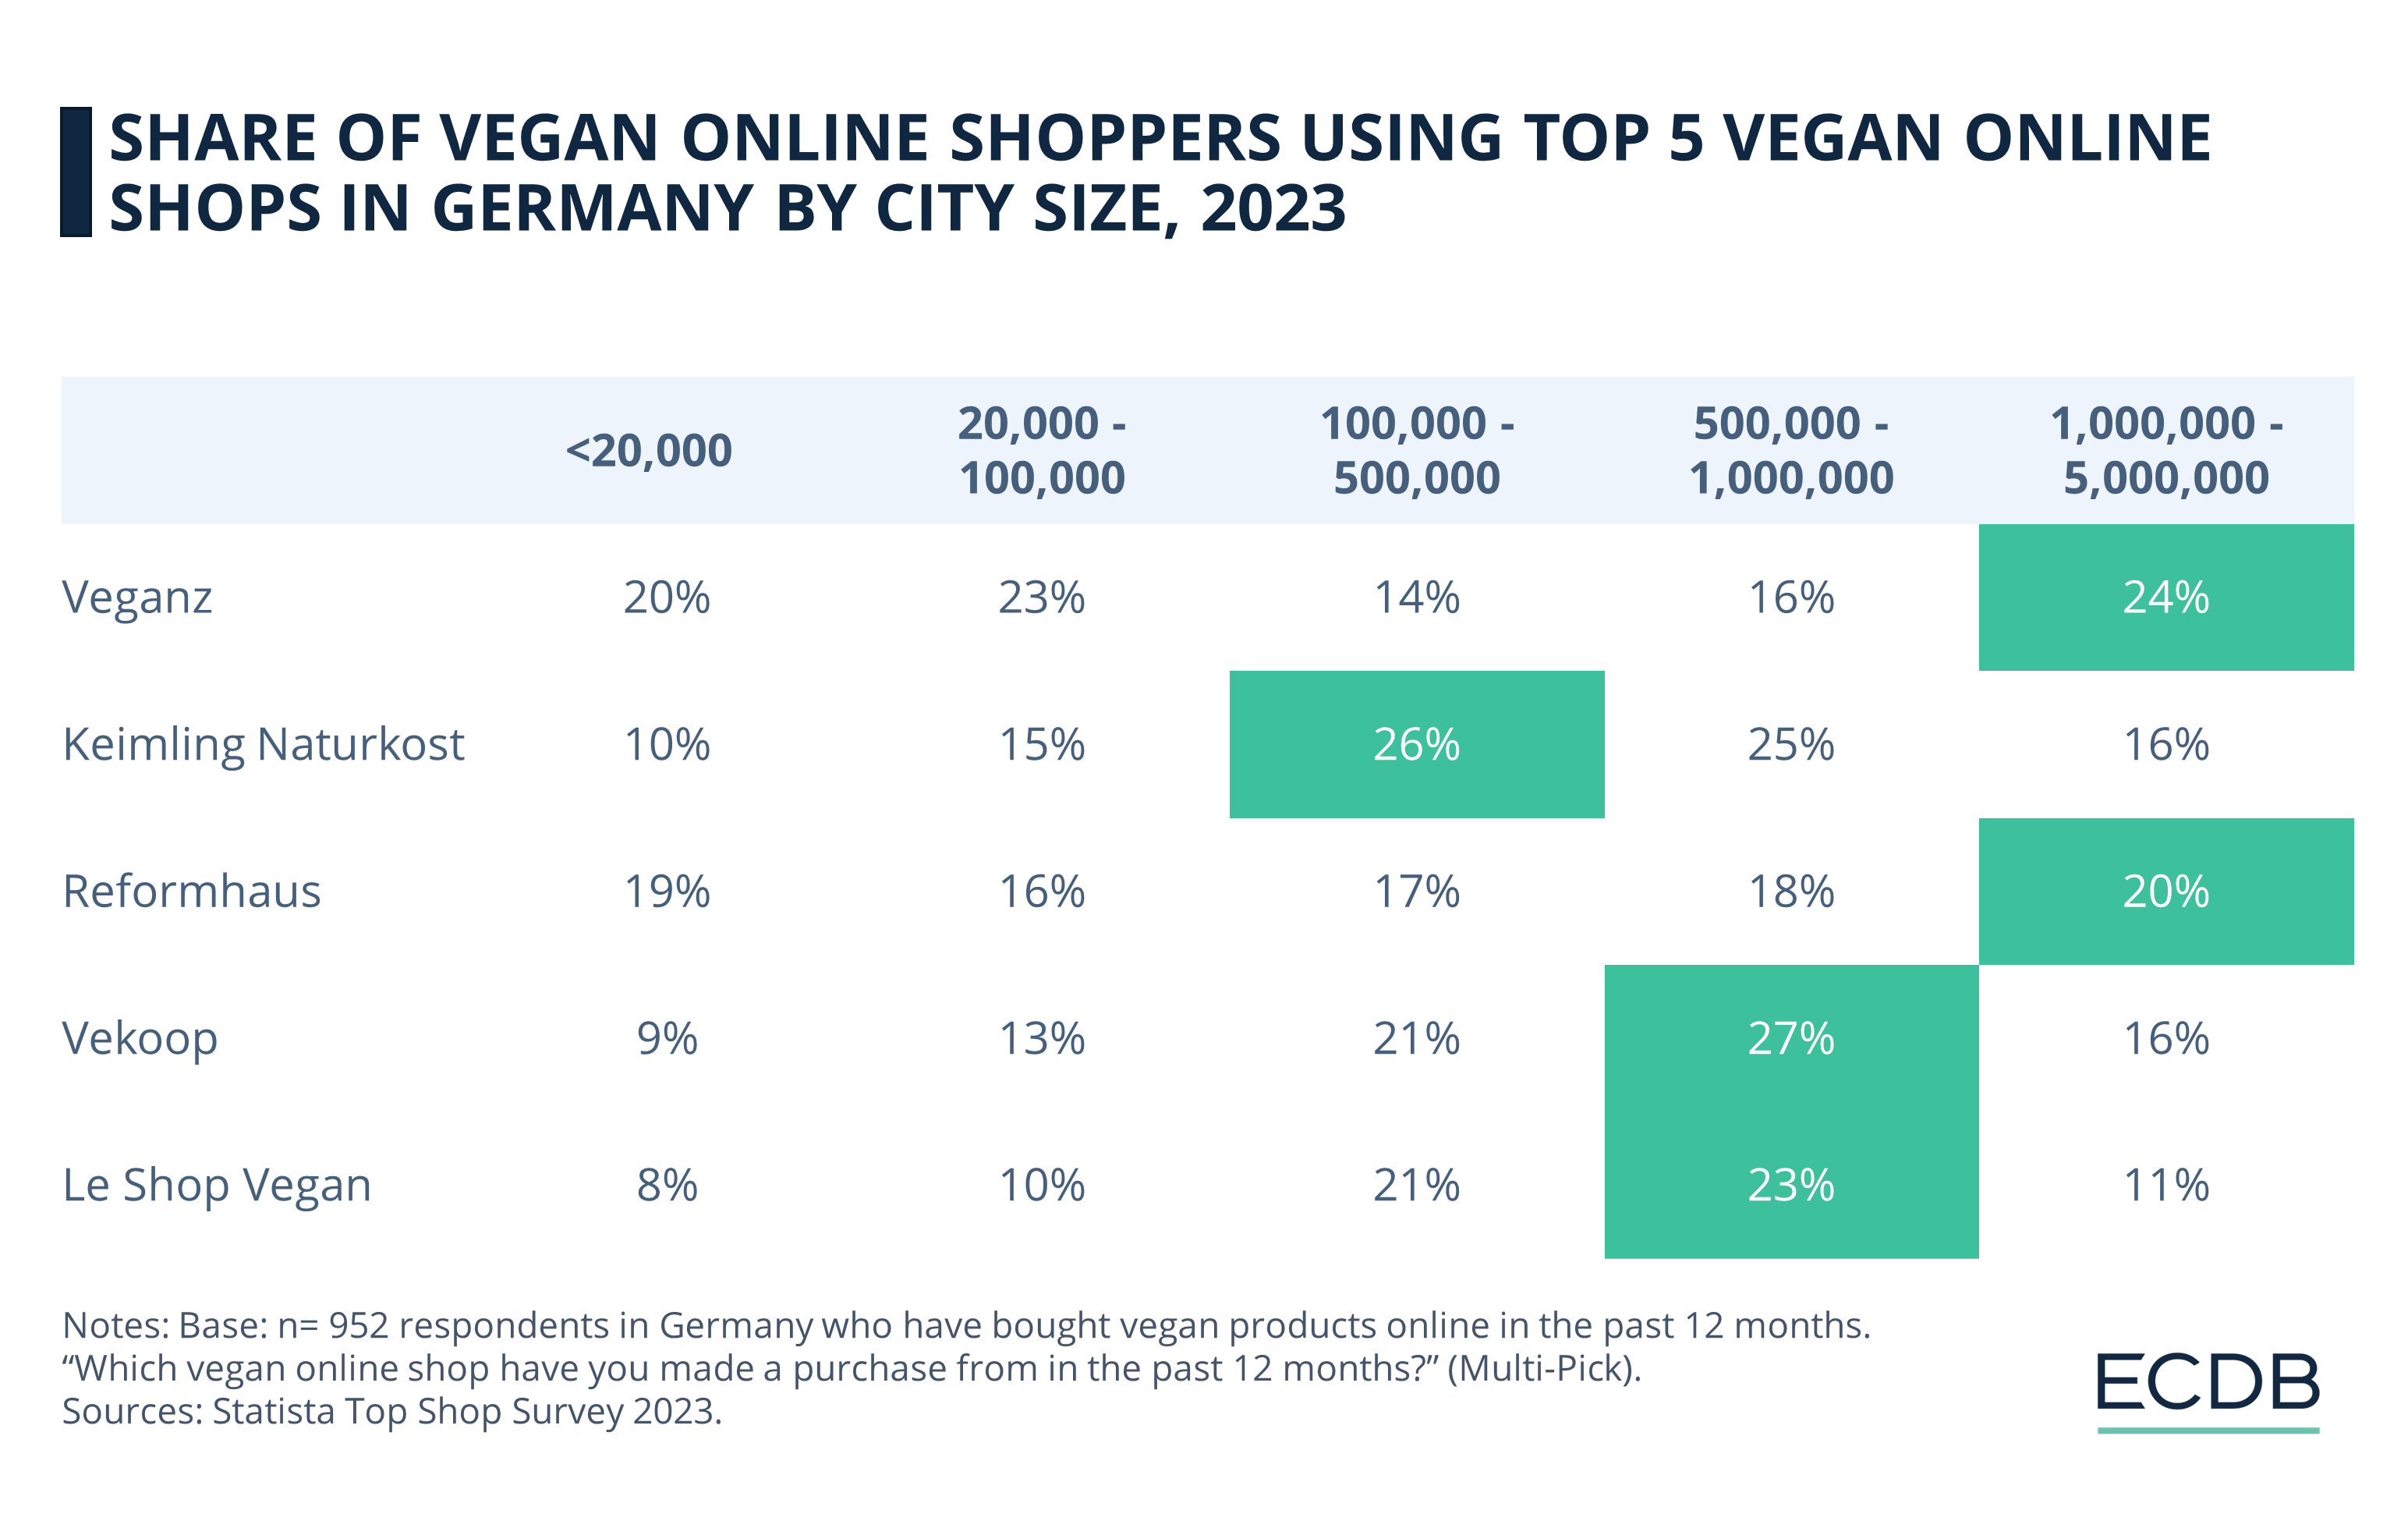 Share of Vegan Online Shoppers Using Top 5 Vegan Online Shops in Germany by City Size, 2023